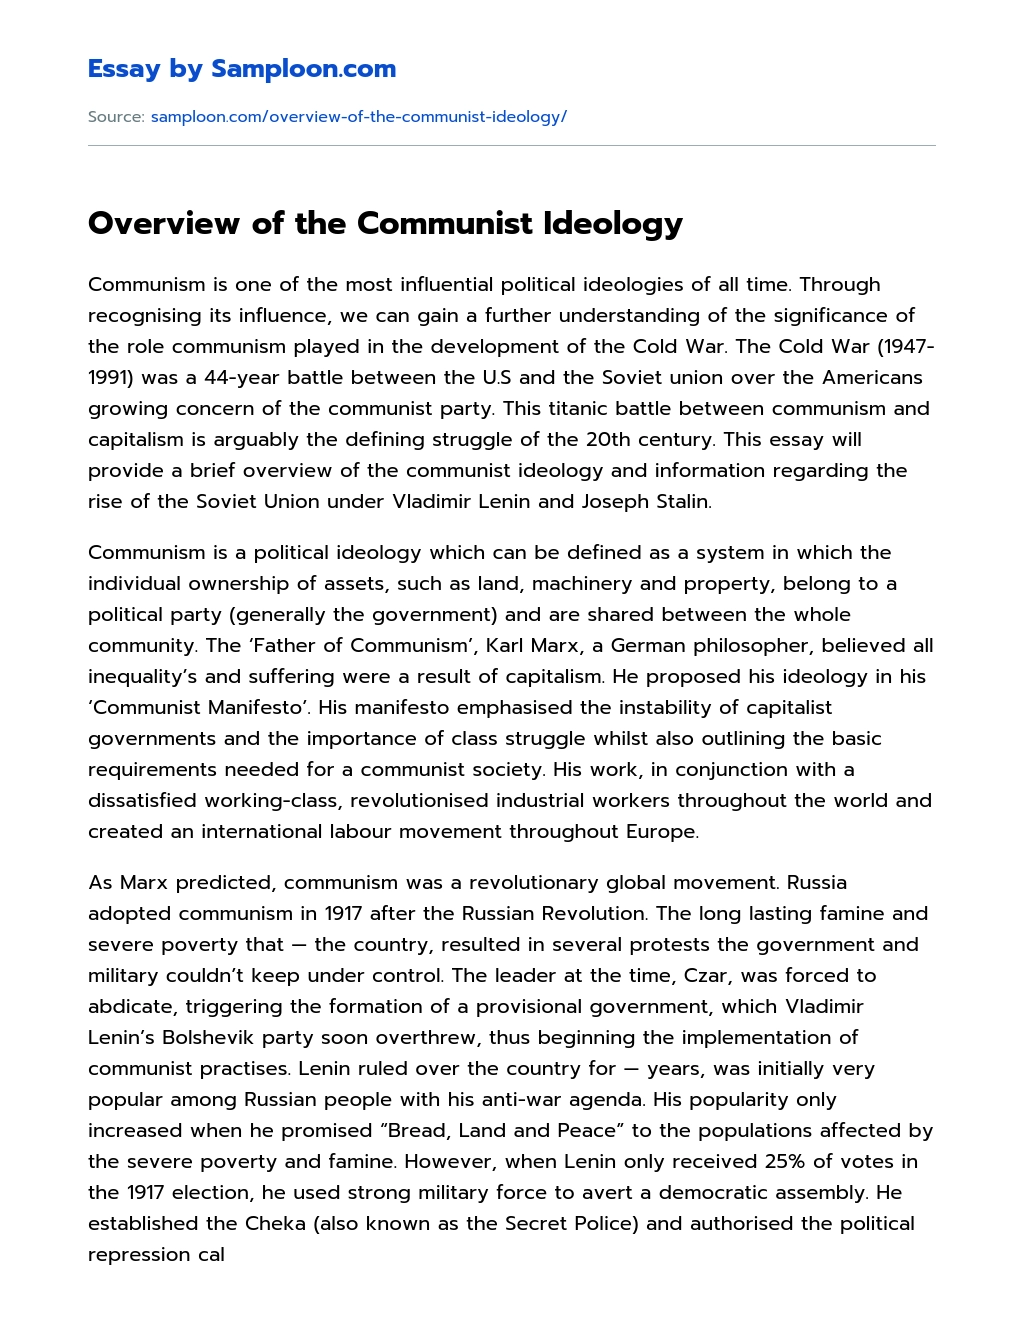 Overview of the Communist Ideology essay